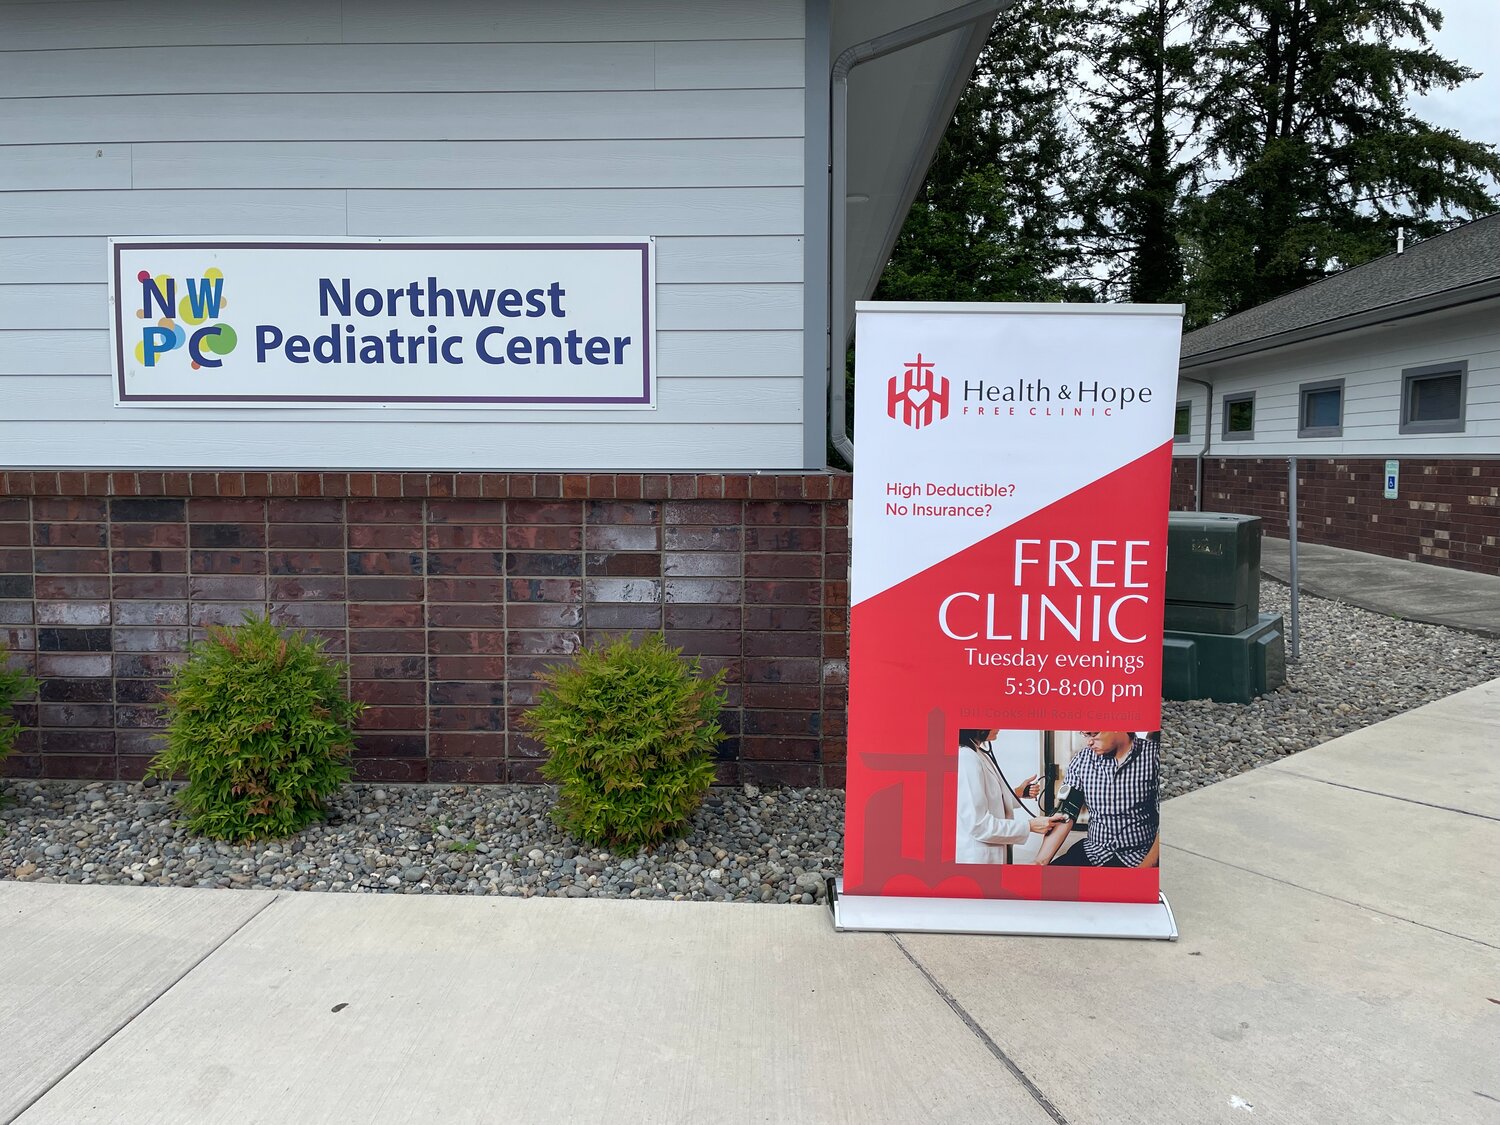 Health and Hope Clinic is open from 5:30 p.m. to 8 p.m. on Tuesdays at 1911 Cooks Hill Road, Centralia.